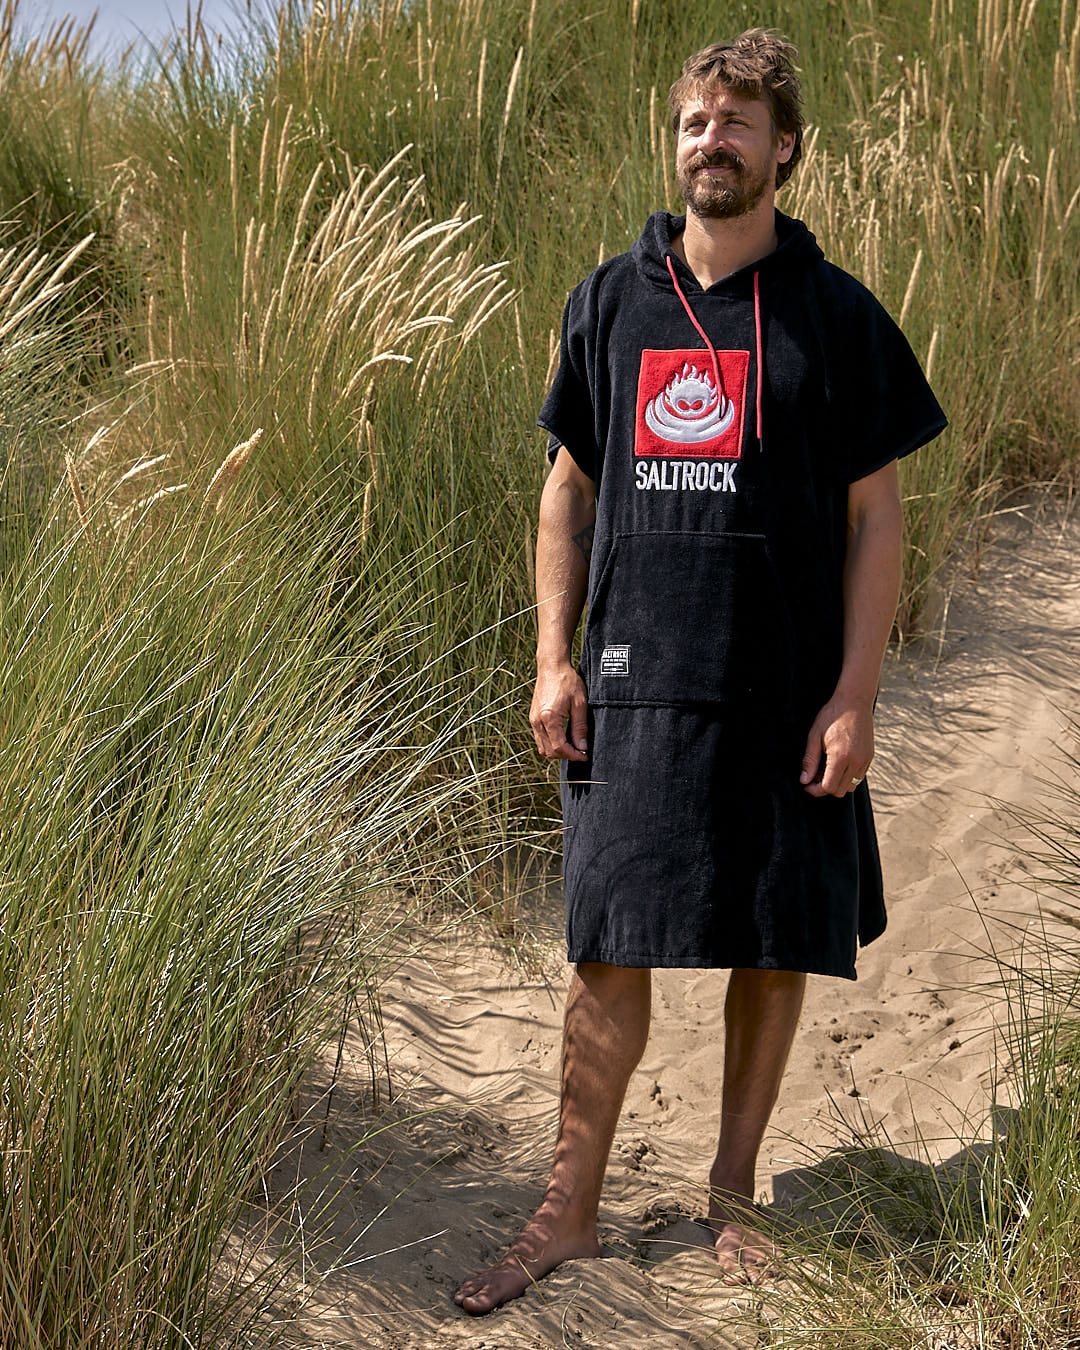 A man in a black Corp Changing Towel - Black made of absorbent, cotton towelling material with a Saltrock logo standing on a sandy beach with tall grasses in the background.